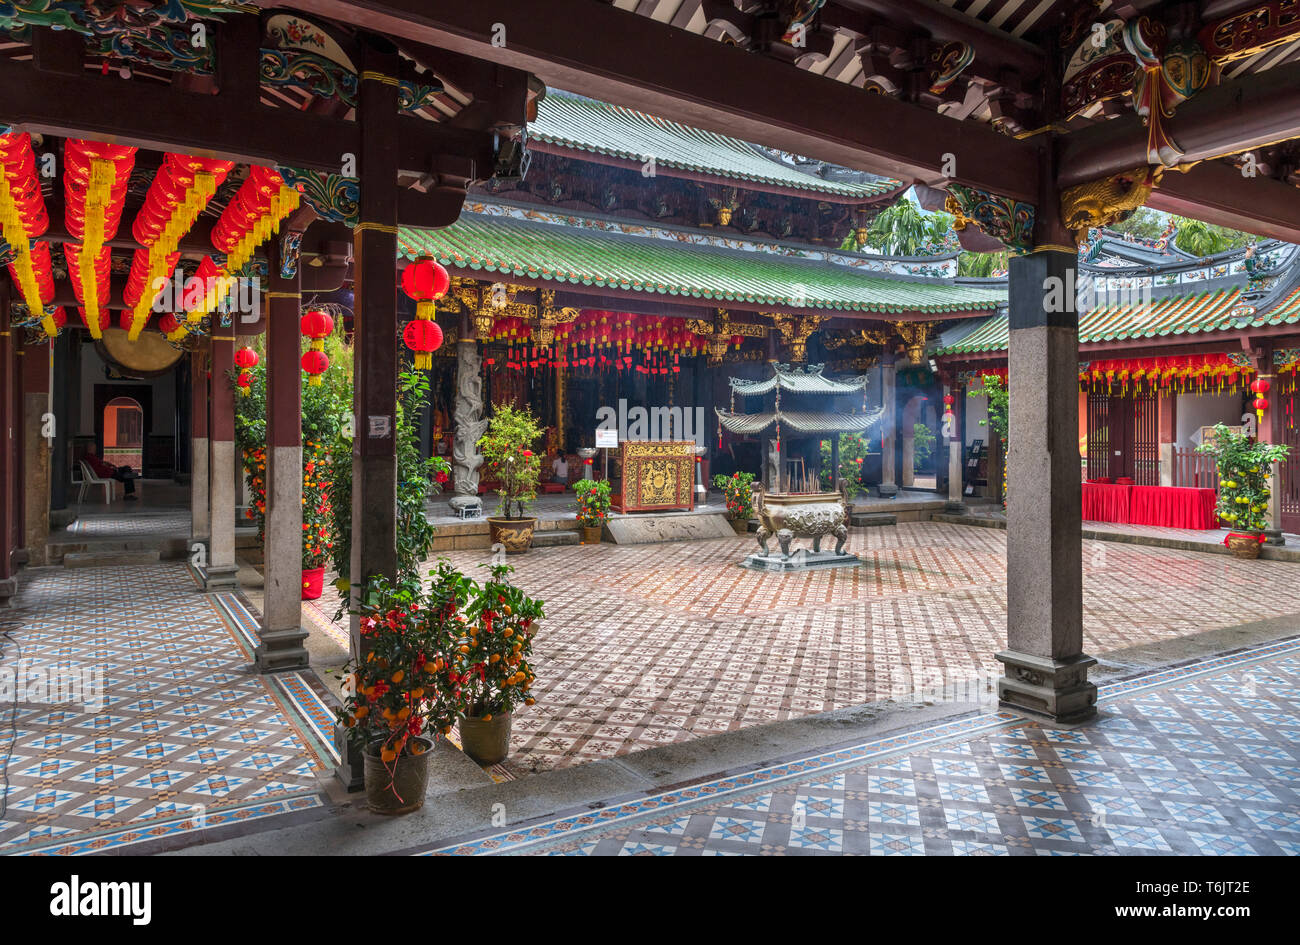 Singapore Chinatown. Courtyard in Thian Hock Keng Temple, the oldest Taoist temple in Chinatown, Singapore City, Singapore Stock Photo